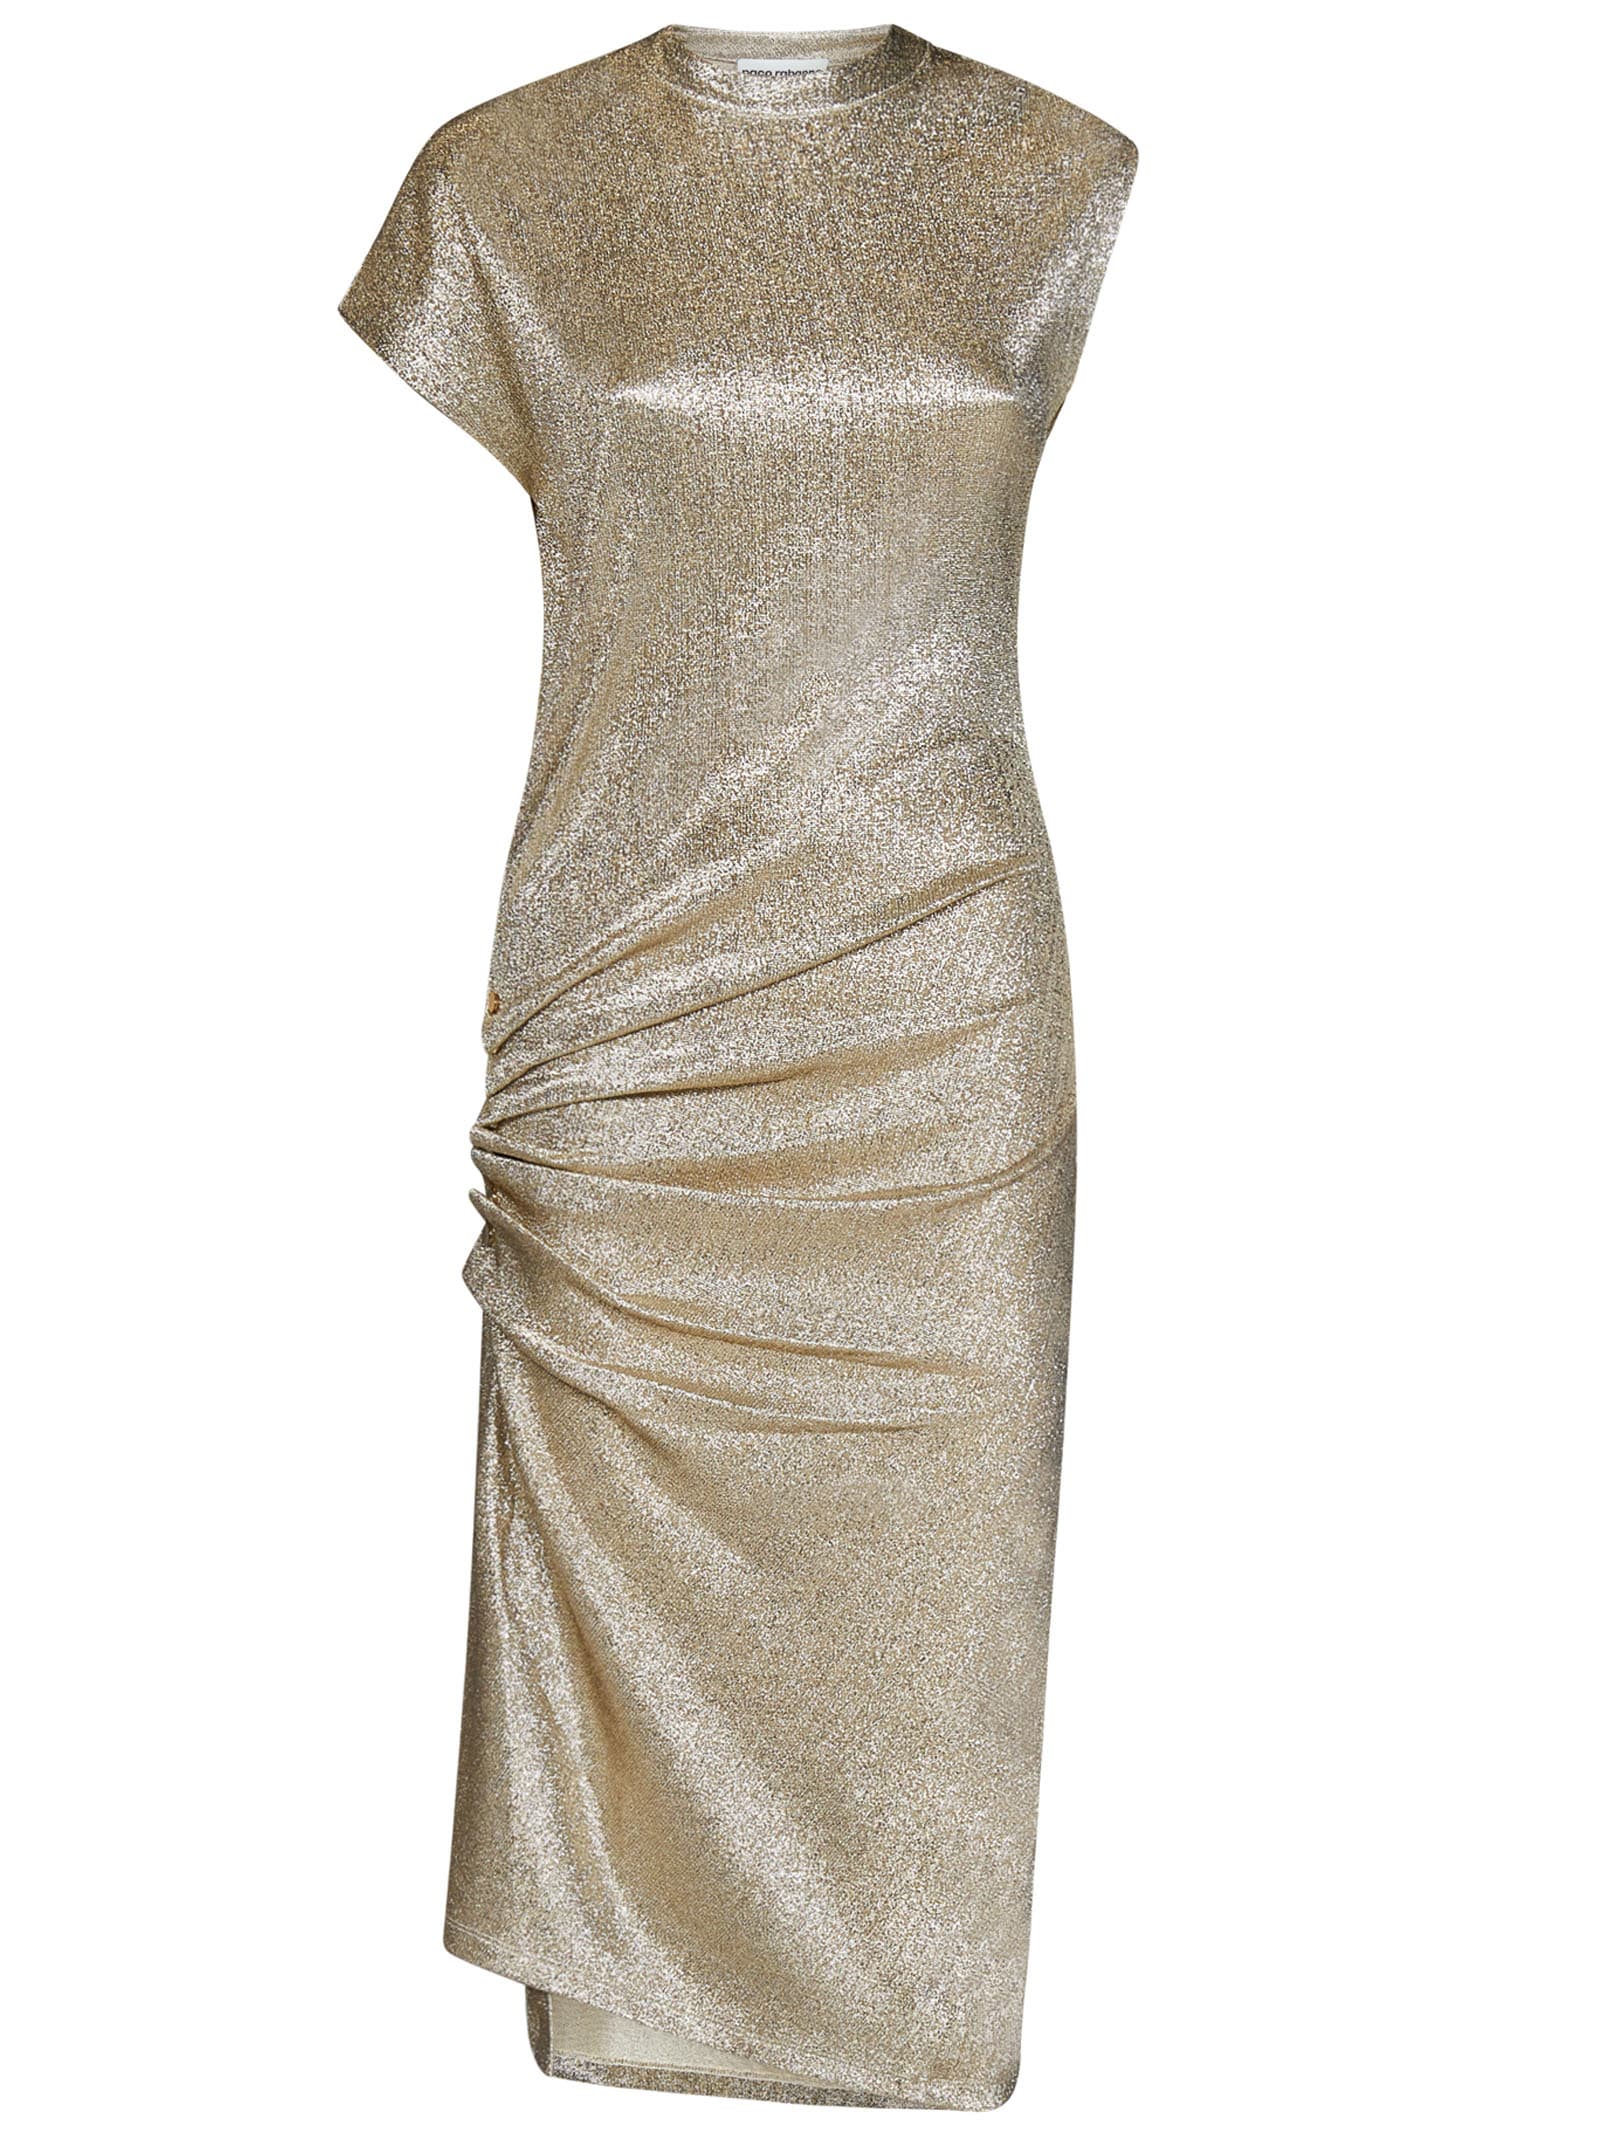 Paco Rabanne Dress In Silver/gold